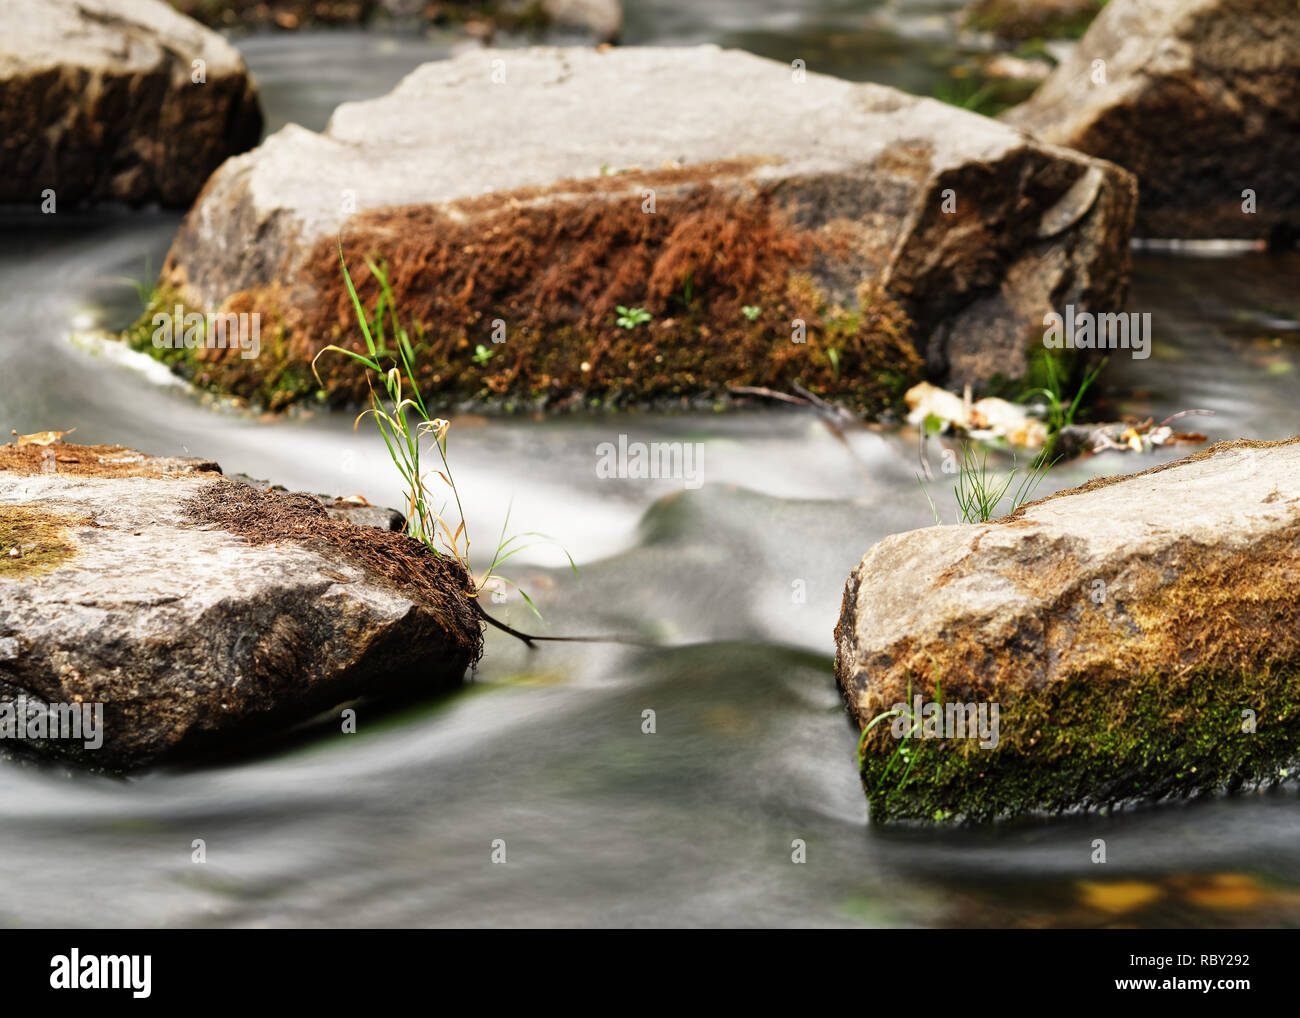 Detail view of flowing water of a small river, the water flowing past rocks covered with moss and single tufts of grass, narrow sharpening zone, flowi Stock Photo